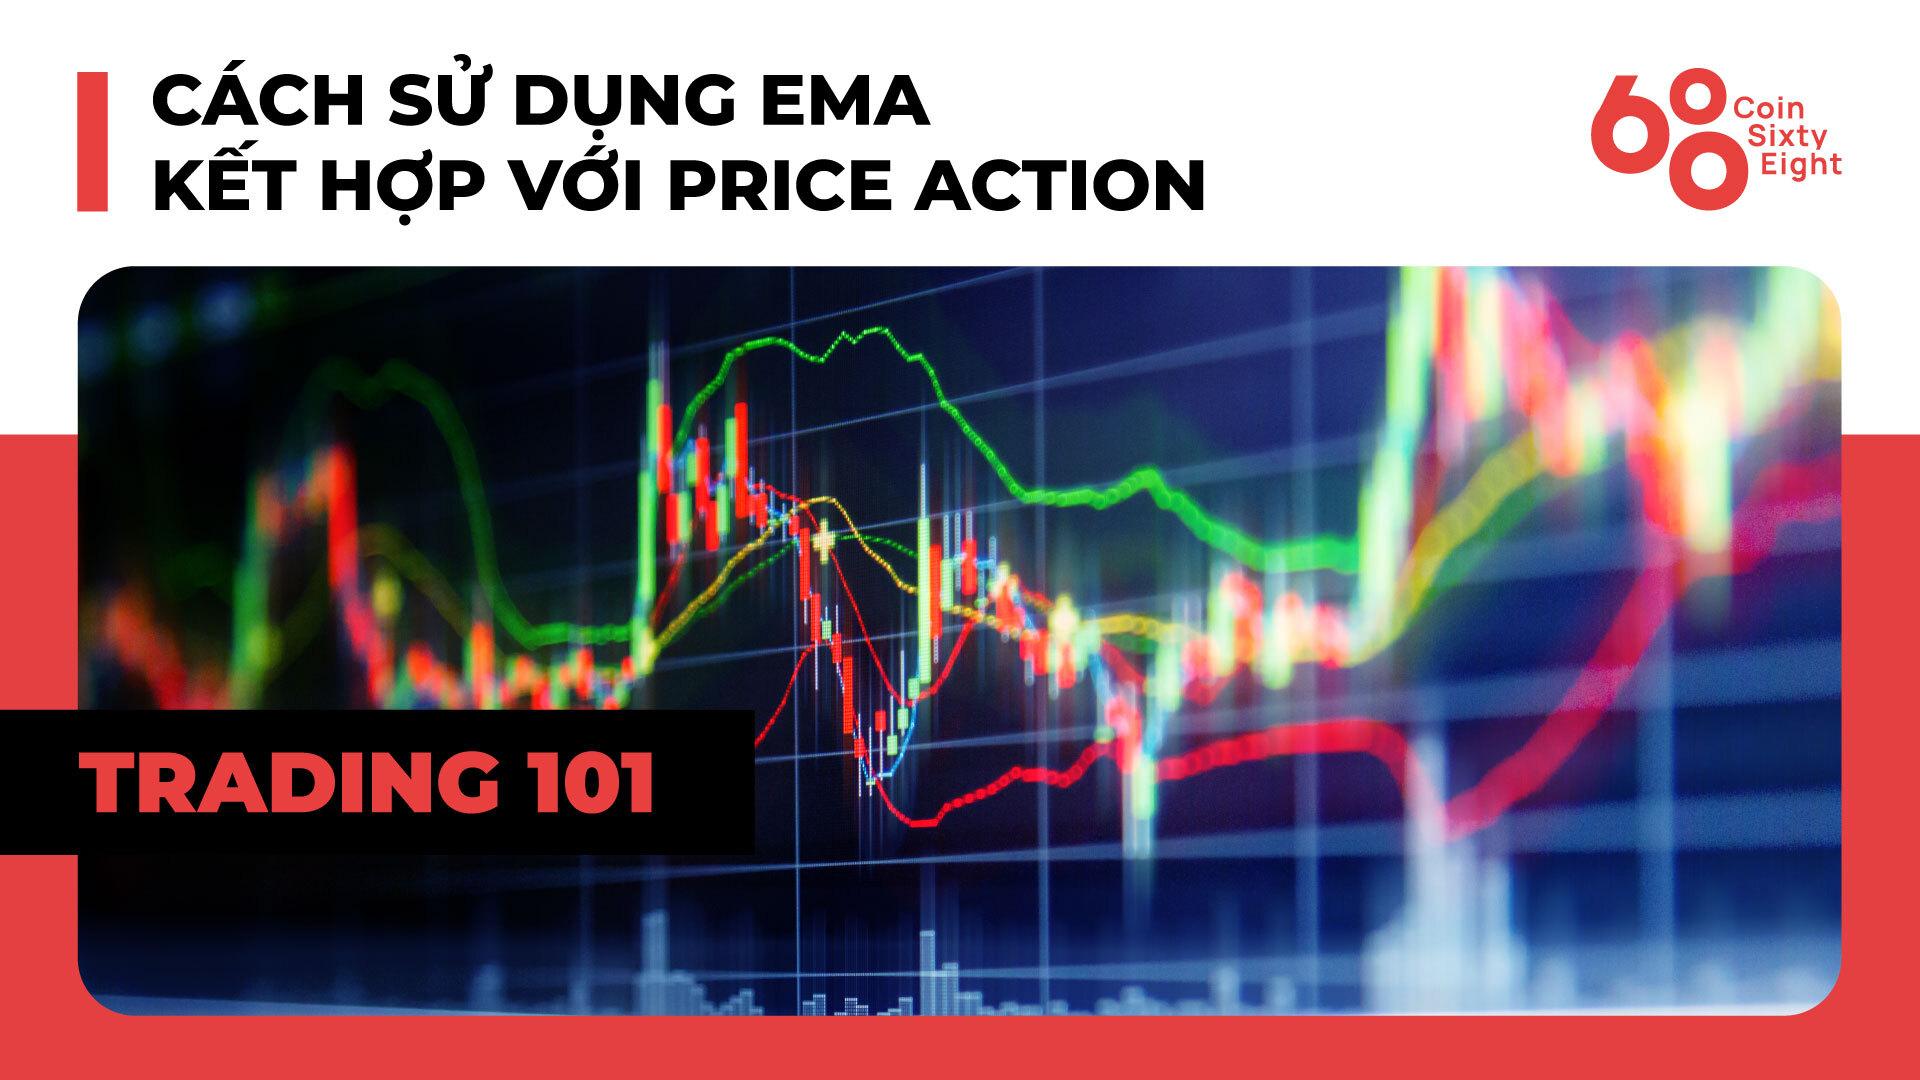 lop-giao-dich-101-price-action-trading-phan-12-cach-su-dung-ema-ket-hop-voi-price-action-hieu-qua